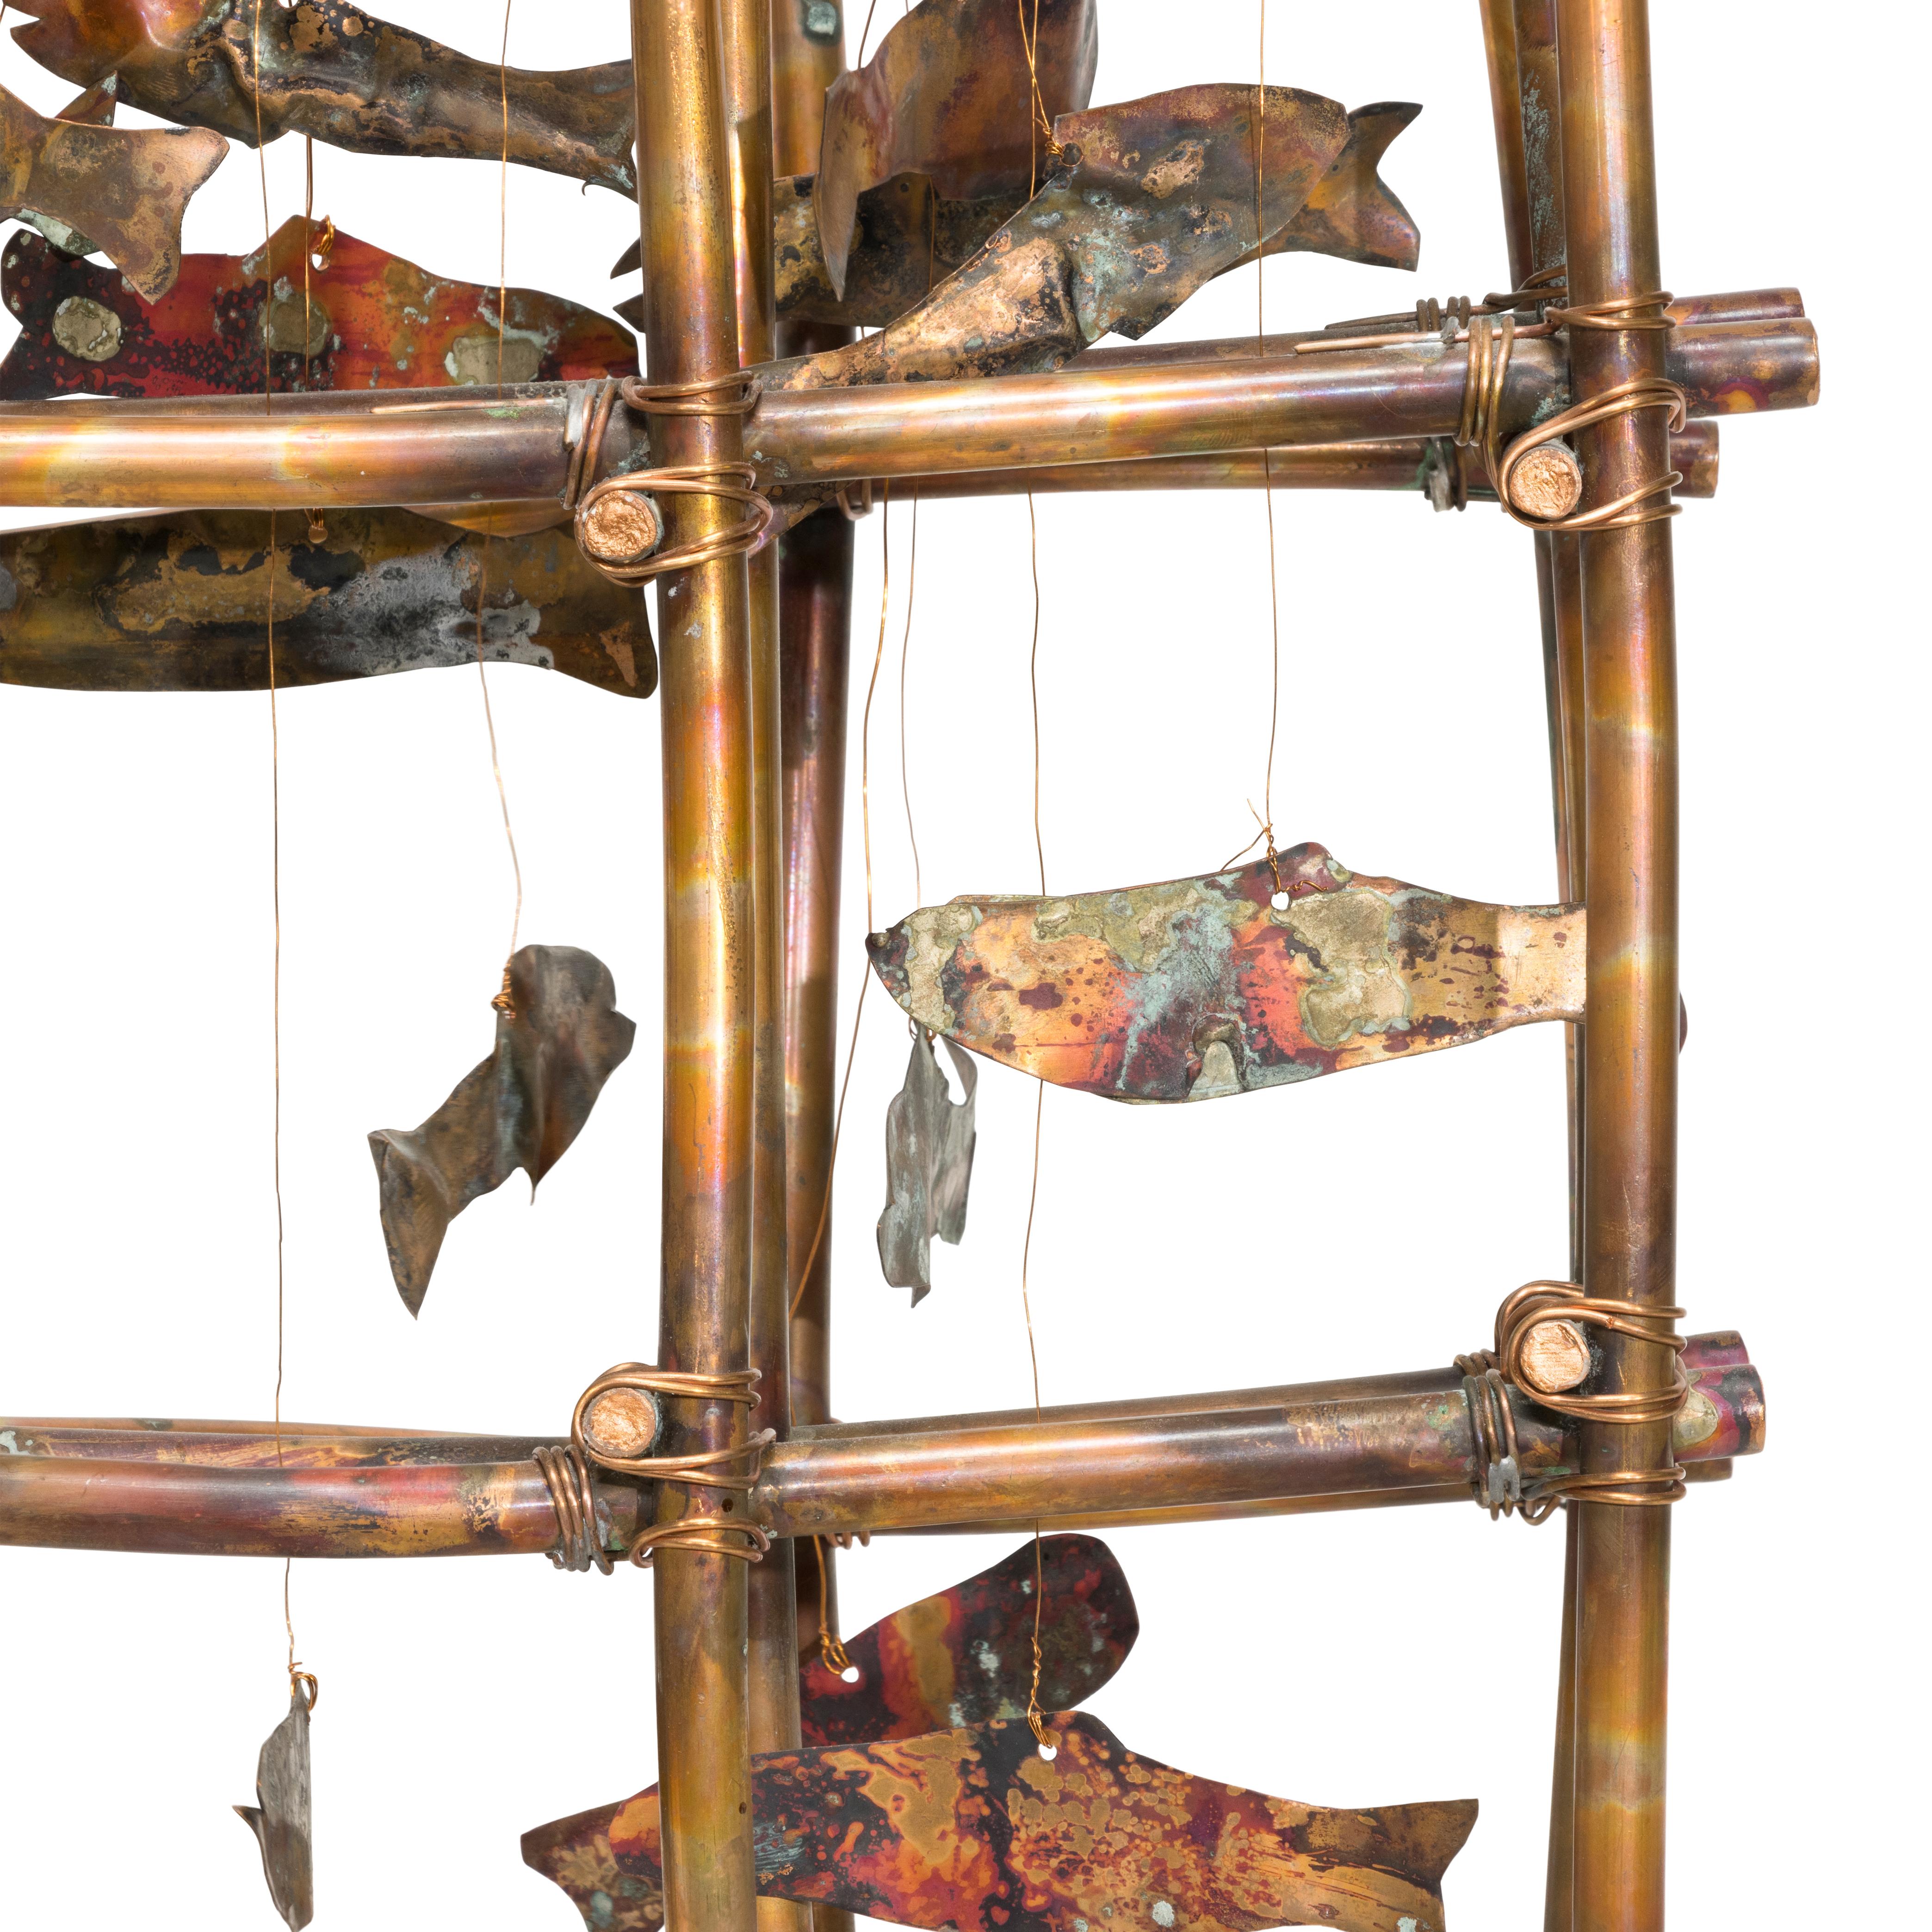 Salmon ladder/rattle maquette by Lillian Pitt (1943 Wasco). Made of copper tubing and hanging cut copper salmon. Maquette for public commission at the University of Washington that was never produced. 18